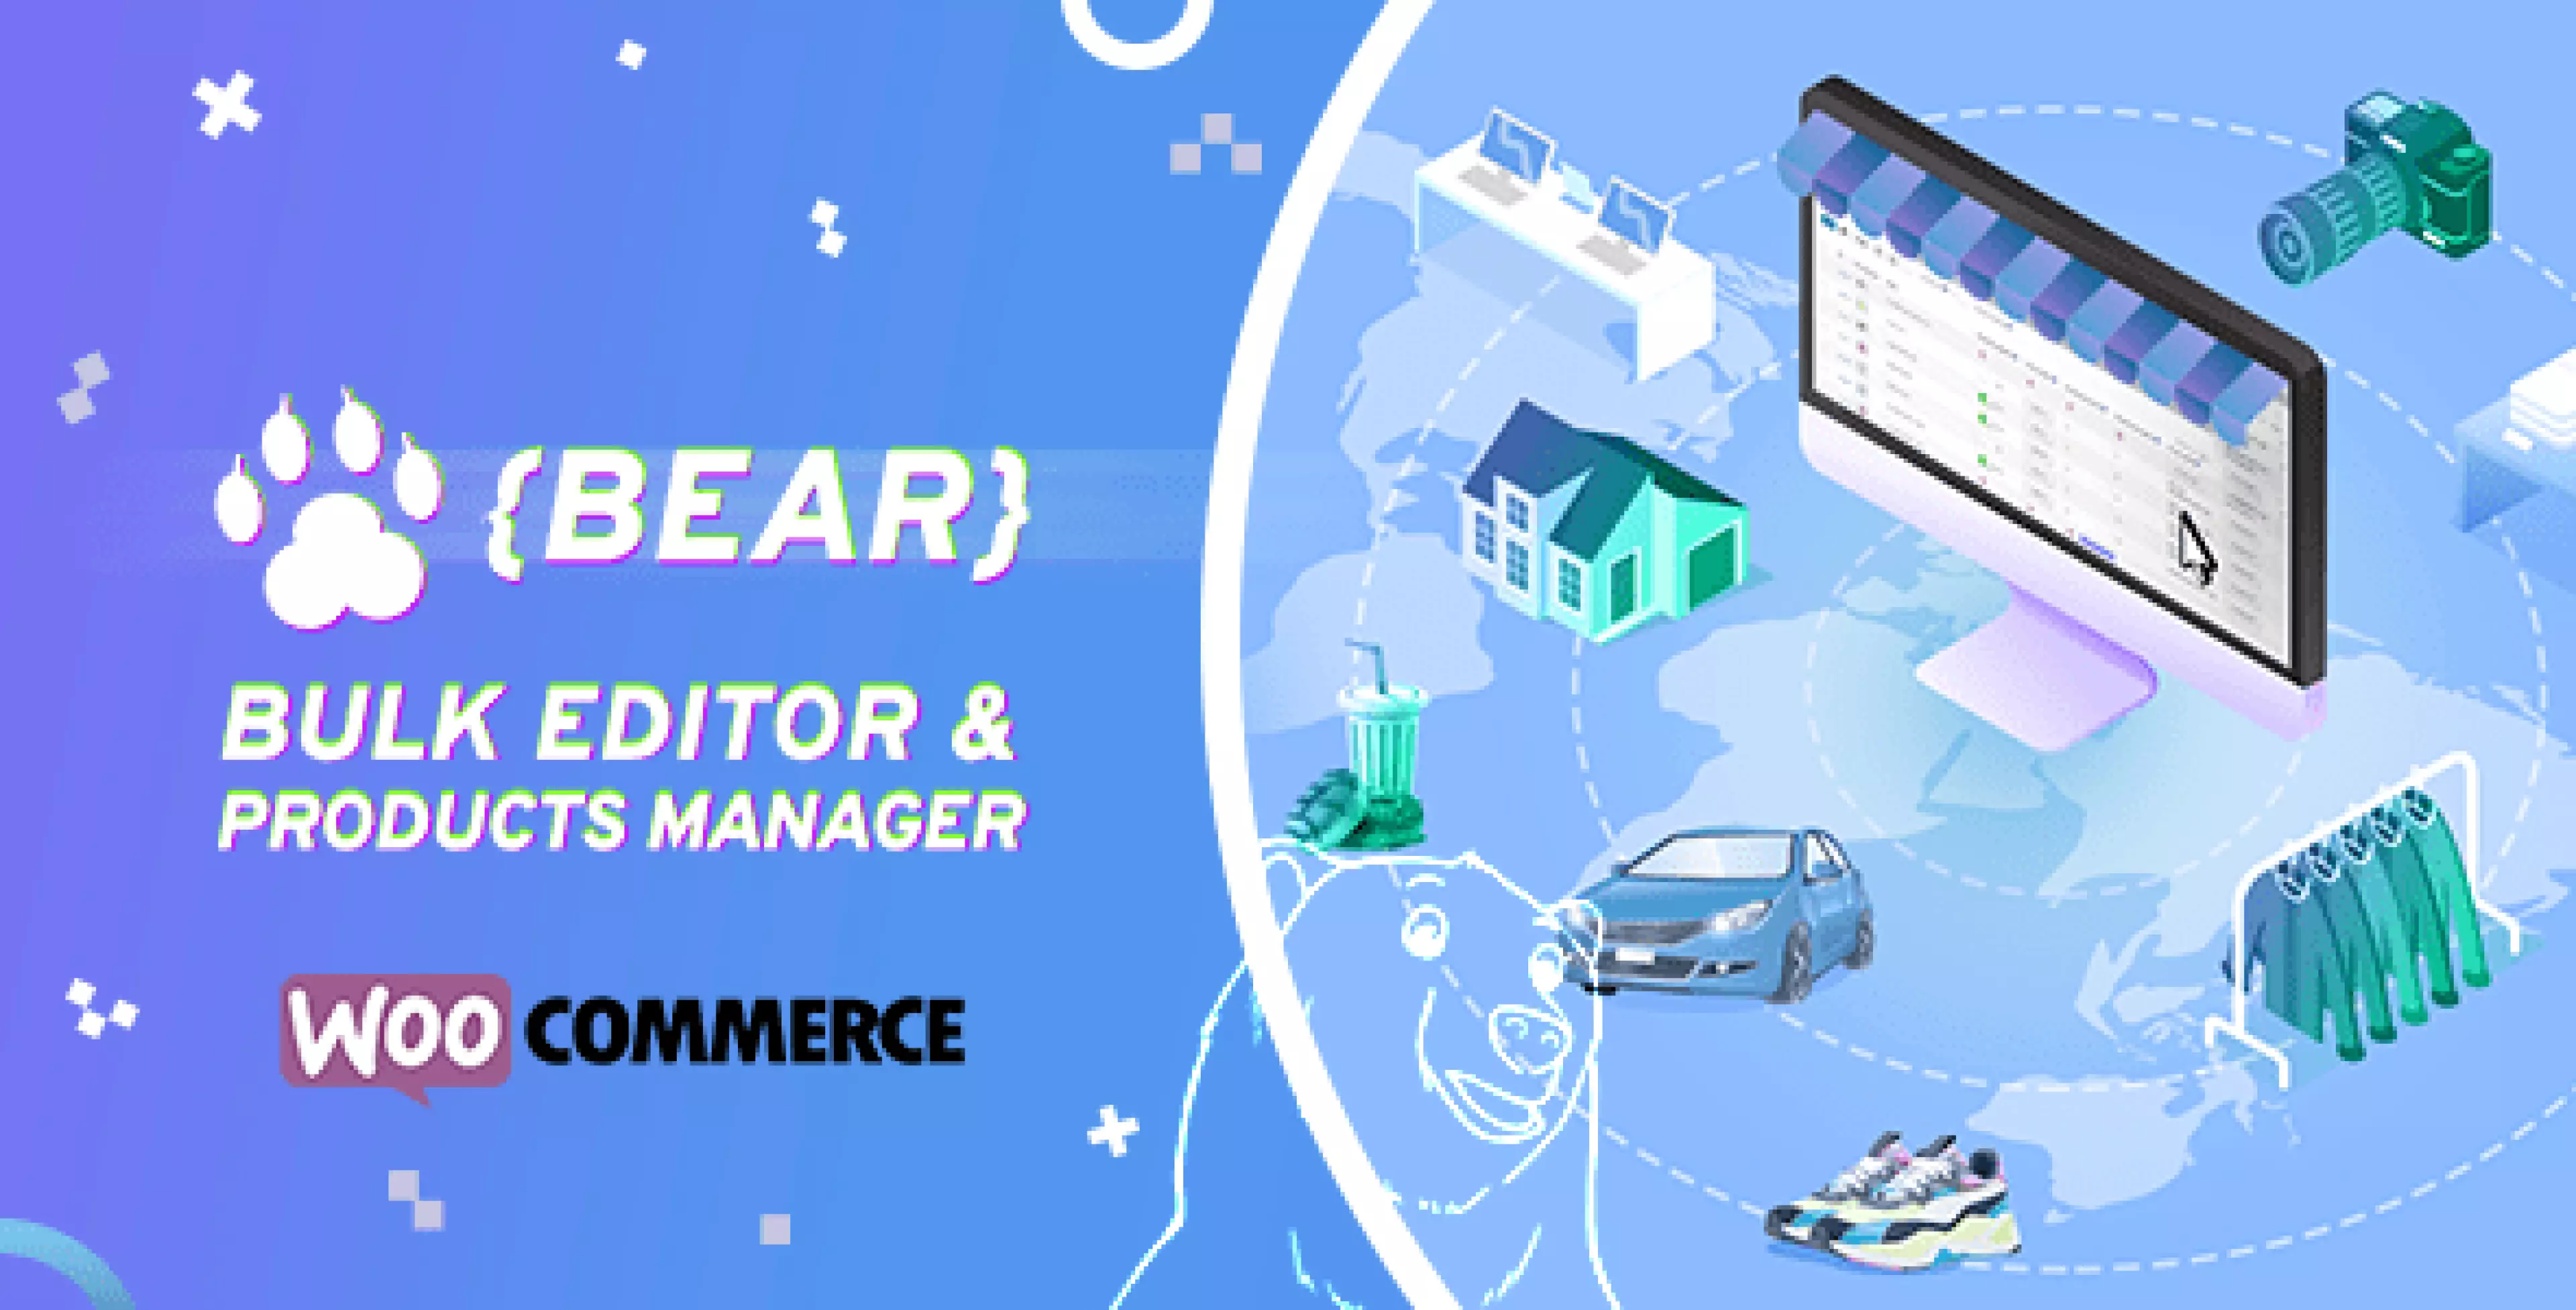 WOOBE - WooCommerce Bulk Editor and Products Manager Professional